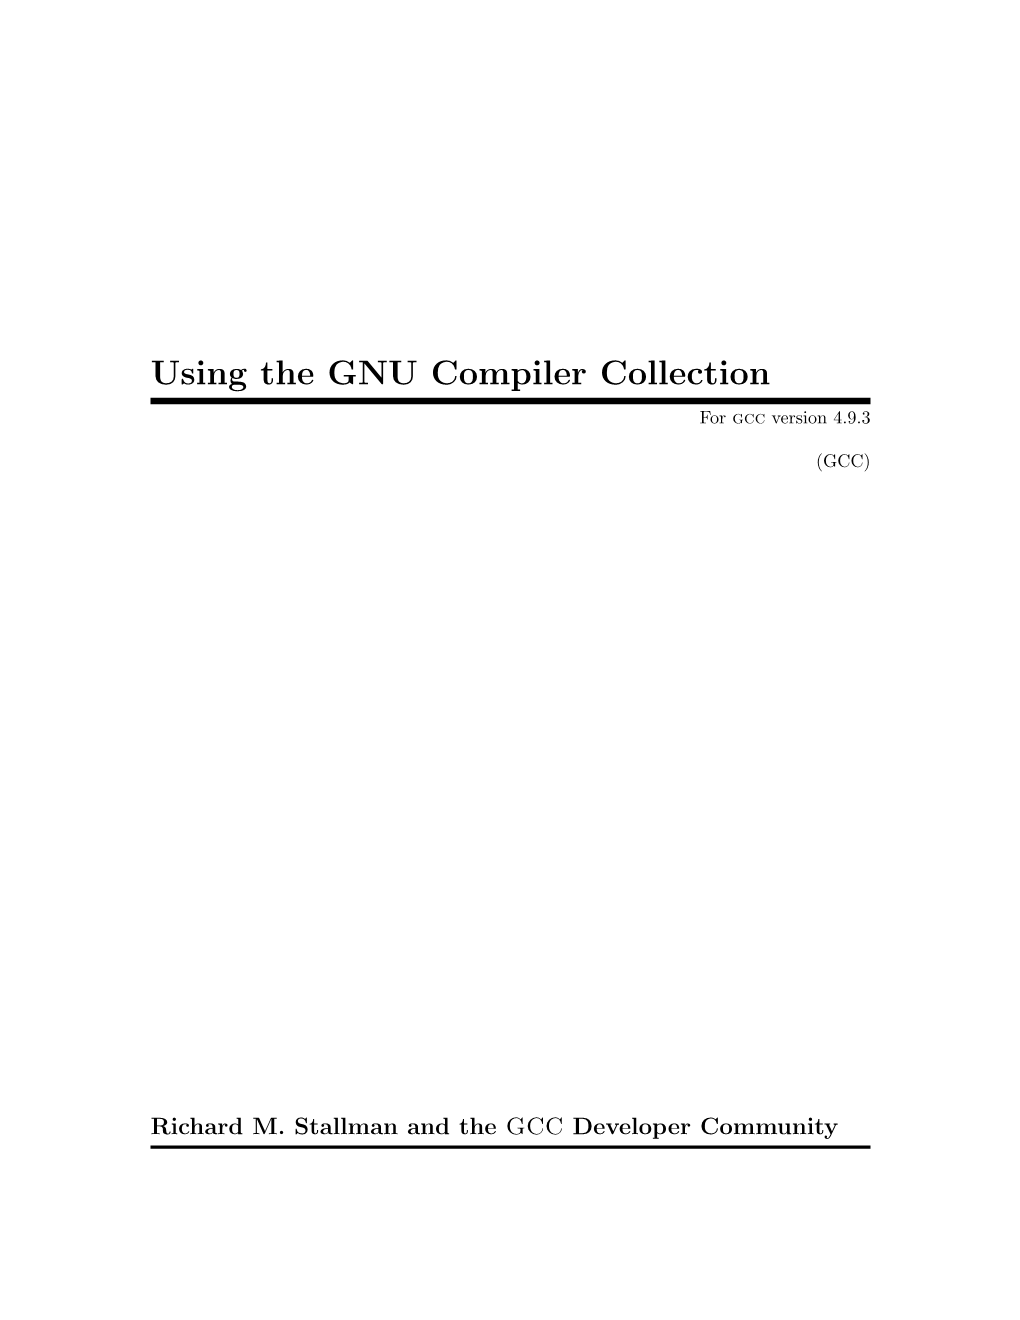 In Using the GNU Compiler Collection (GCC)